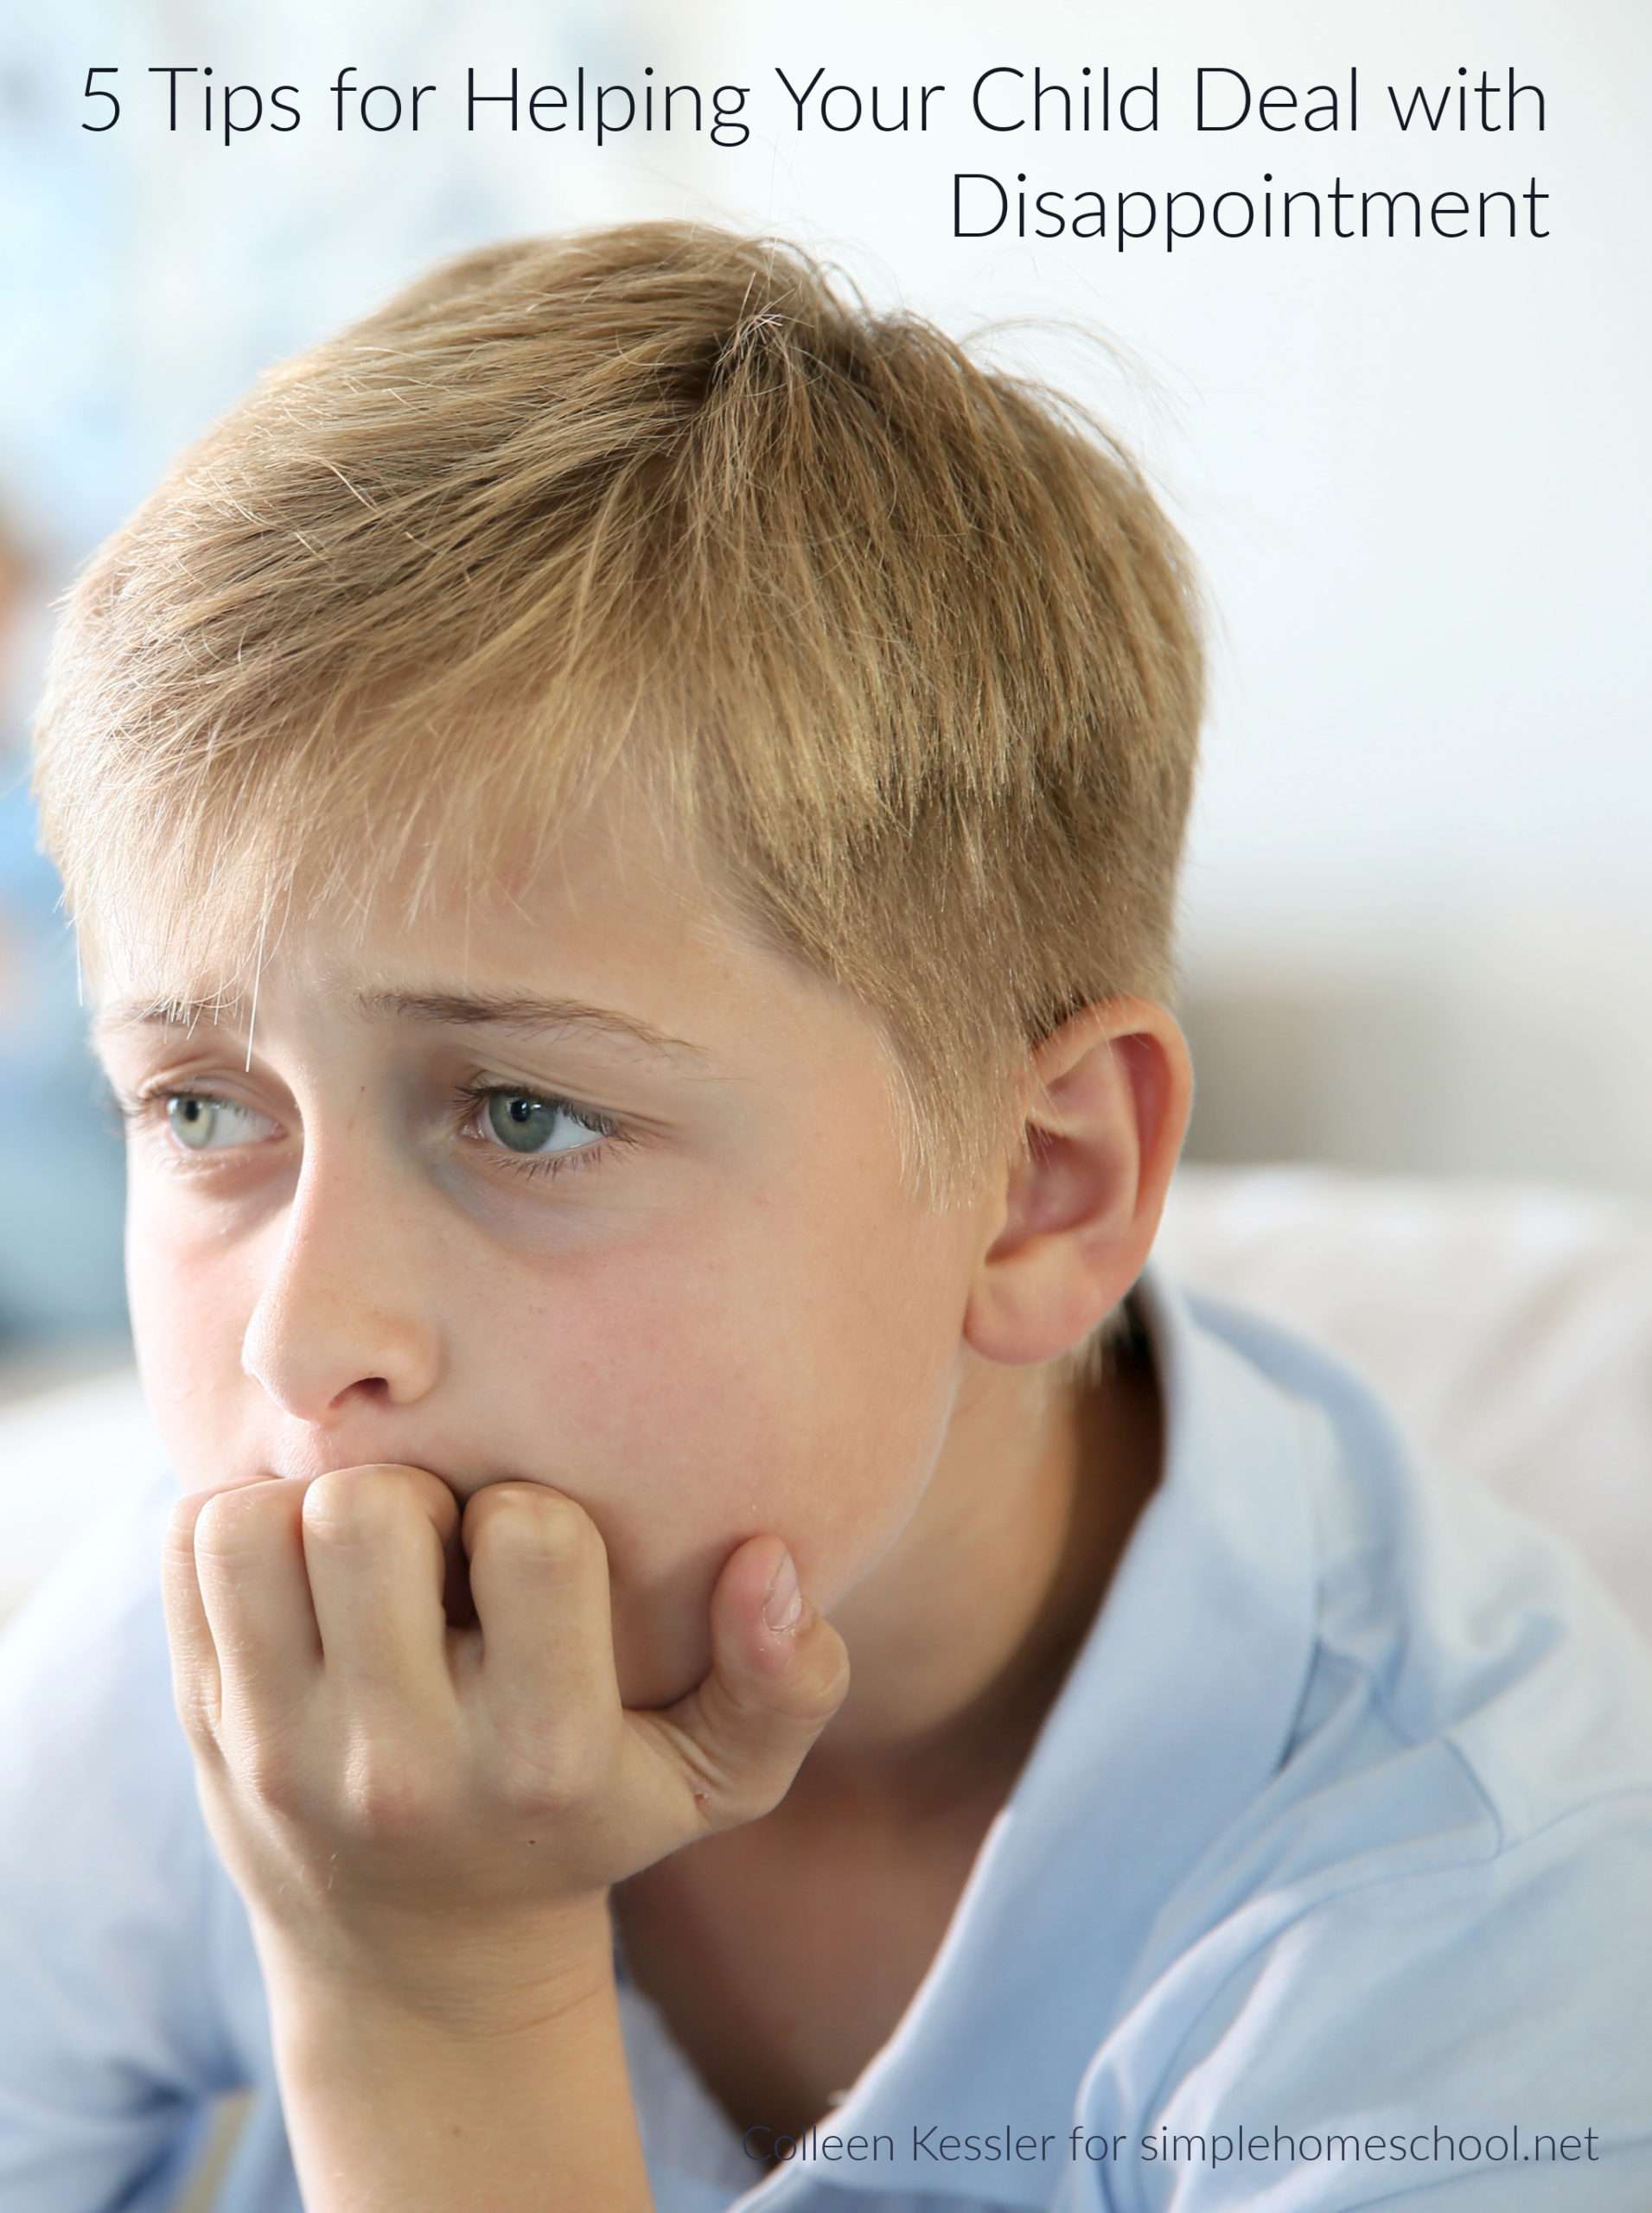 5 Tips for Helping Your Child Deal with Disappointment